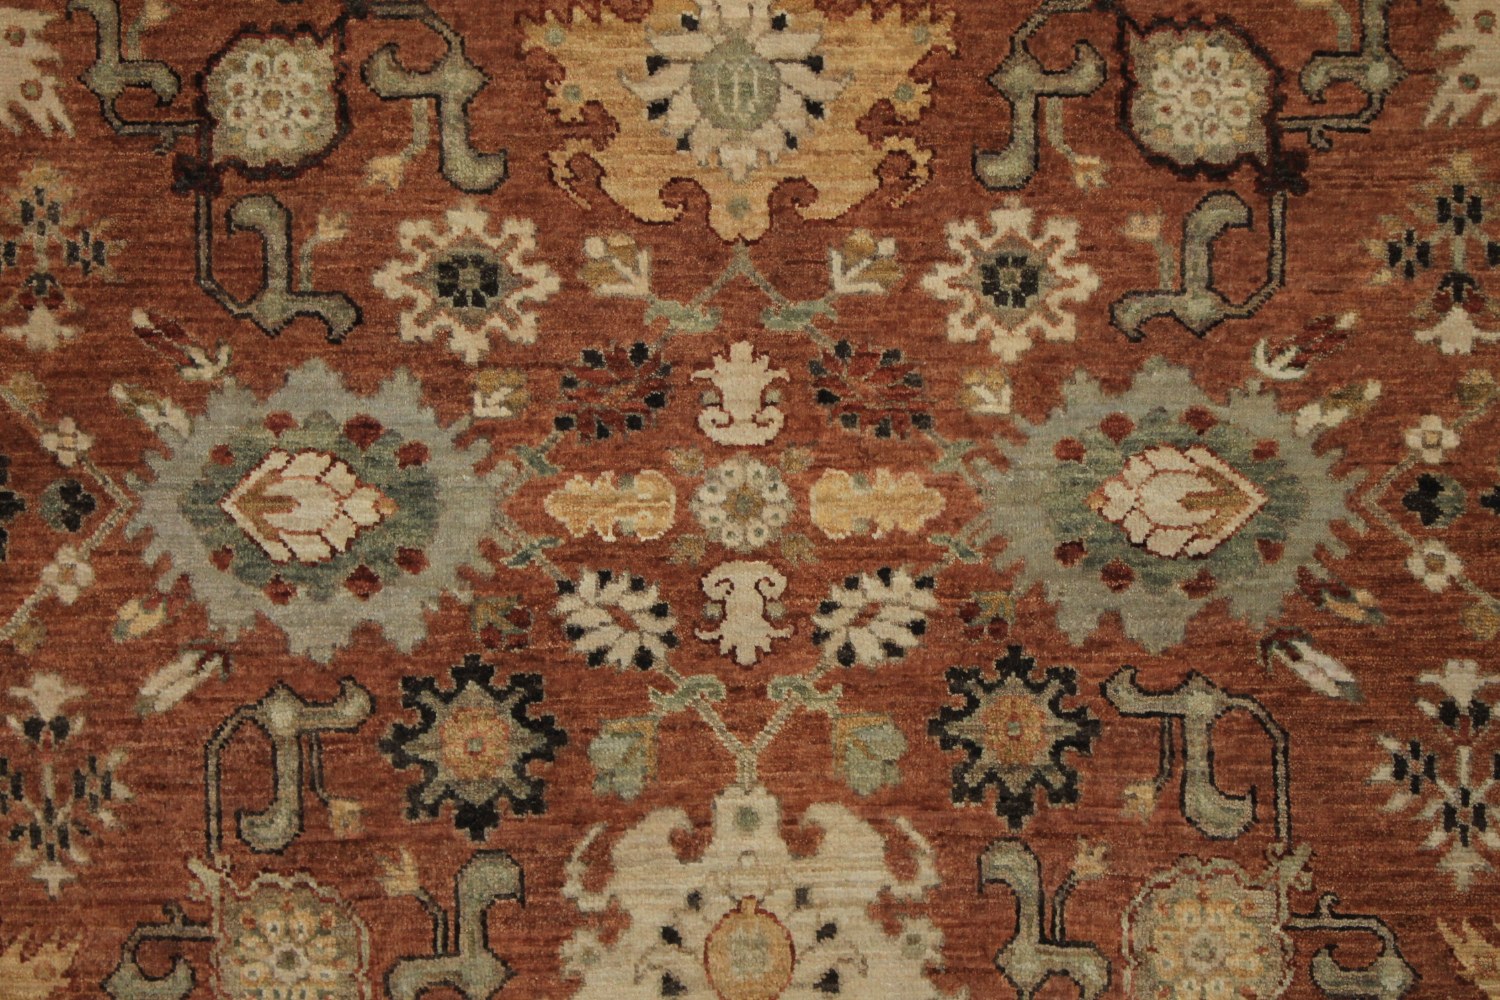 8x10 Antique Revival Hand Knotted Wool Area Rug - MR15035